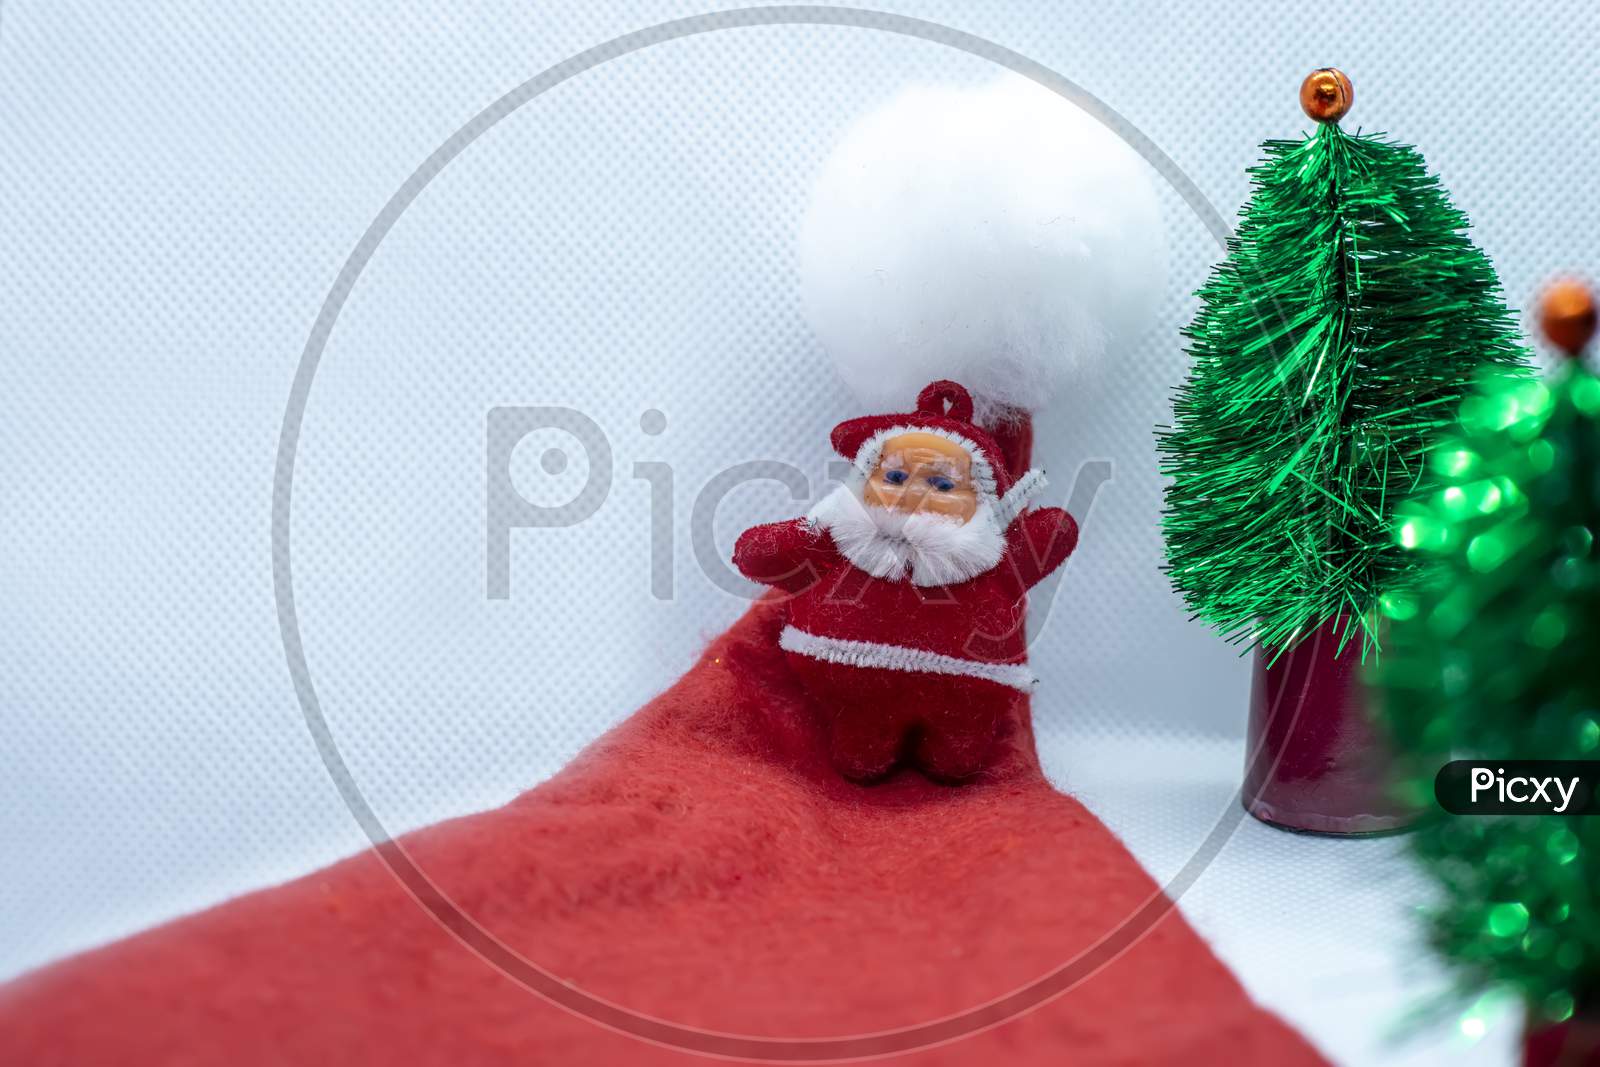 Santa Claus Stands In A Santa Claus Hat Near A Tree On A White Background